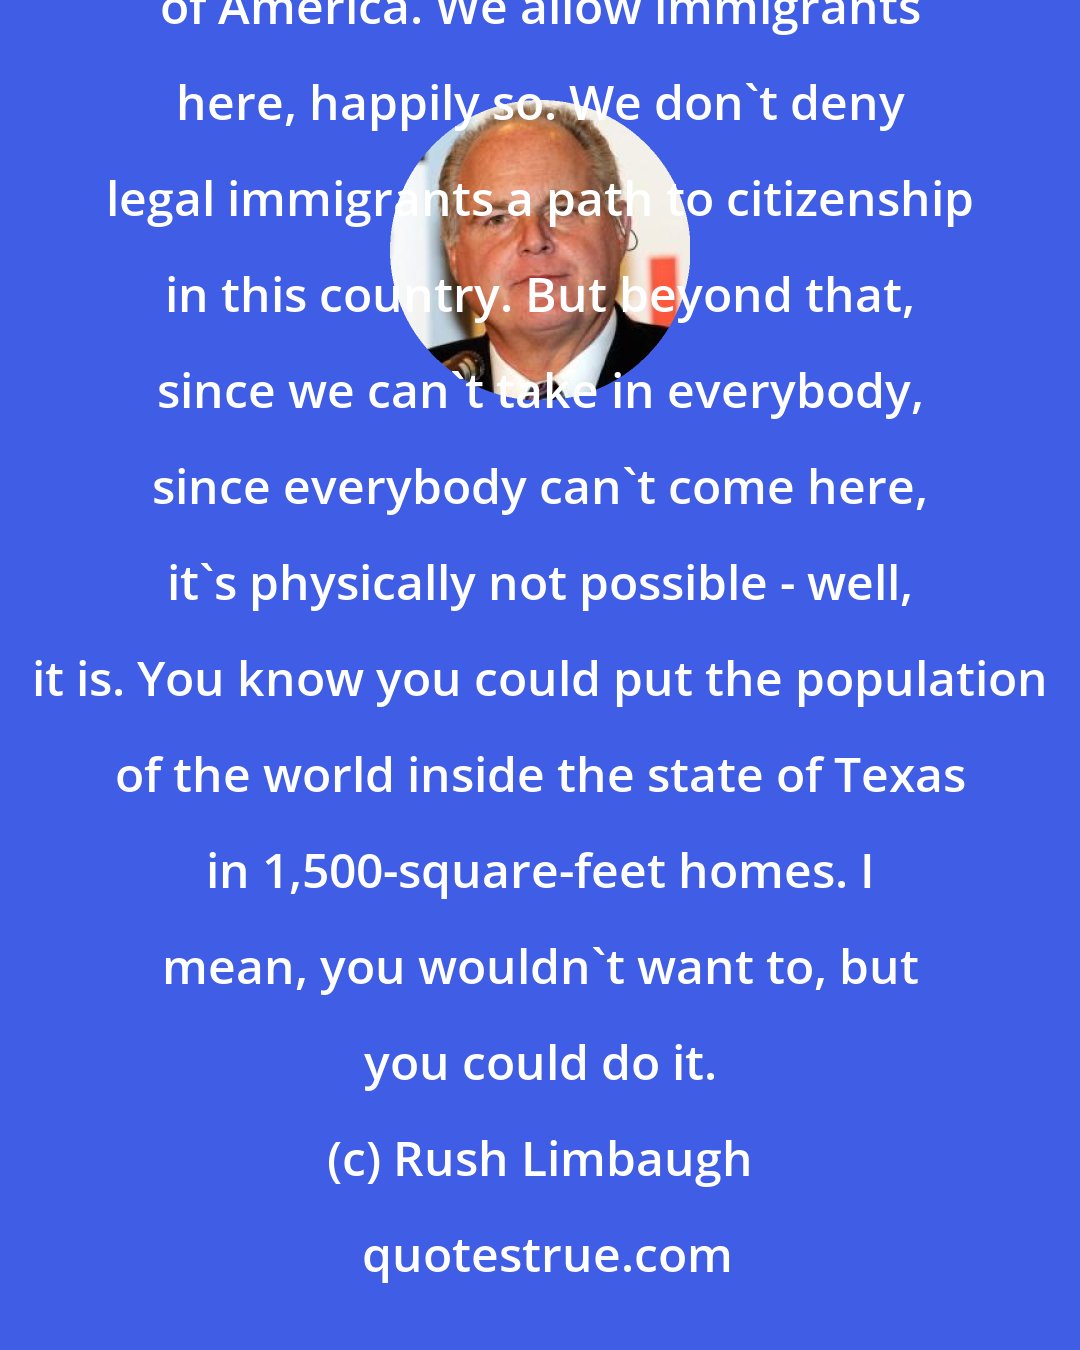 Rush Limbaugh: The law exists for lots of reasons. In the case of migration, the law exists to maintain the integrity of America. We allow immigrants here, happily so. We don't deny legal immigrants a path to citizenship in this country. But beyond that, since we can't take in everybody, since everybody can't come here, it's physically not possible - well, it is. You know you could put the population of the world inside the state of Texas in 1,500-square-feet homes. I mean, you wouldn't want to, but you could do it.